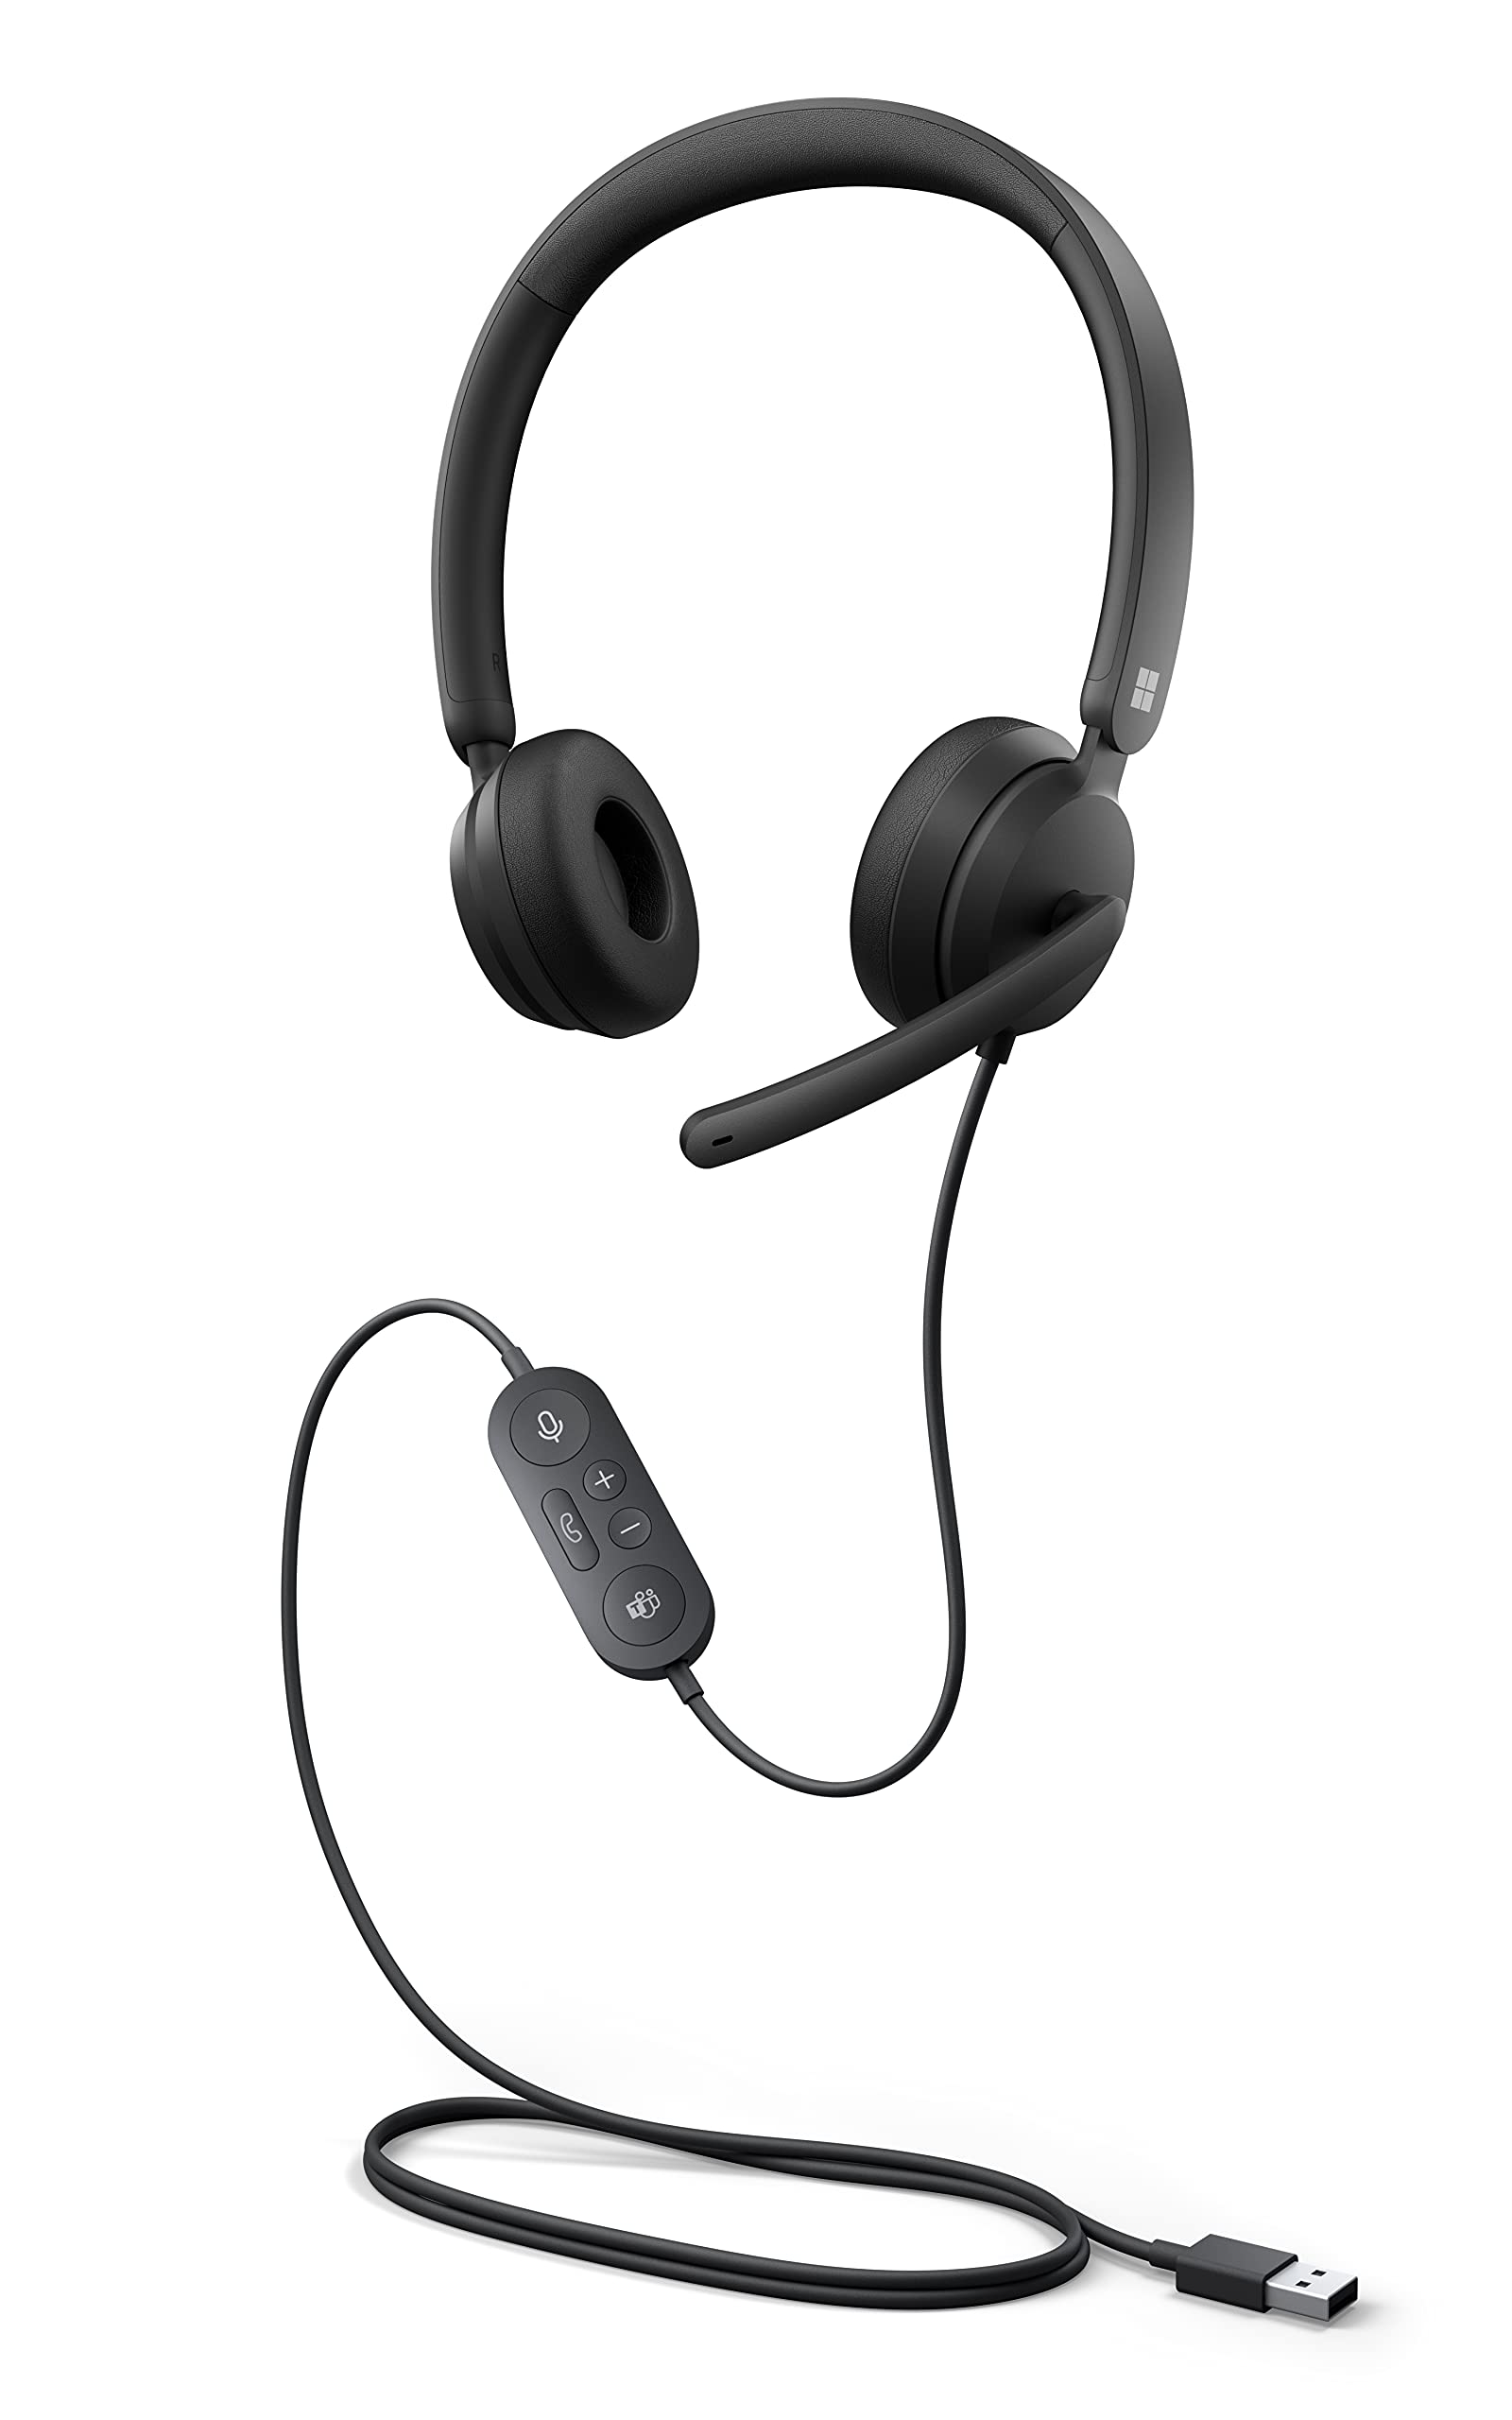 Microsoft Modern USB Headset - Wired Headset,On-Ear Stereo Headphones with Noise-Cancelling Microphone, USB-A Connectivity, In-Line Controls, PC/Mac/Laptop - Certified for Microsoft Teams (Open Box, Like New)